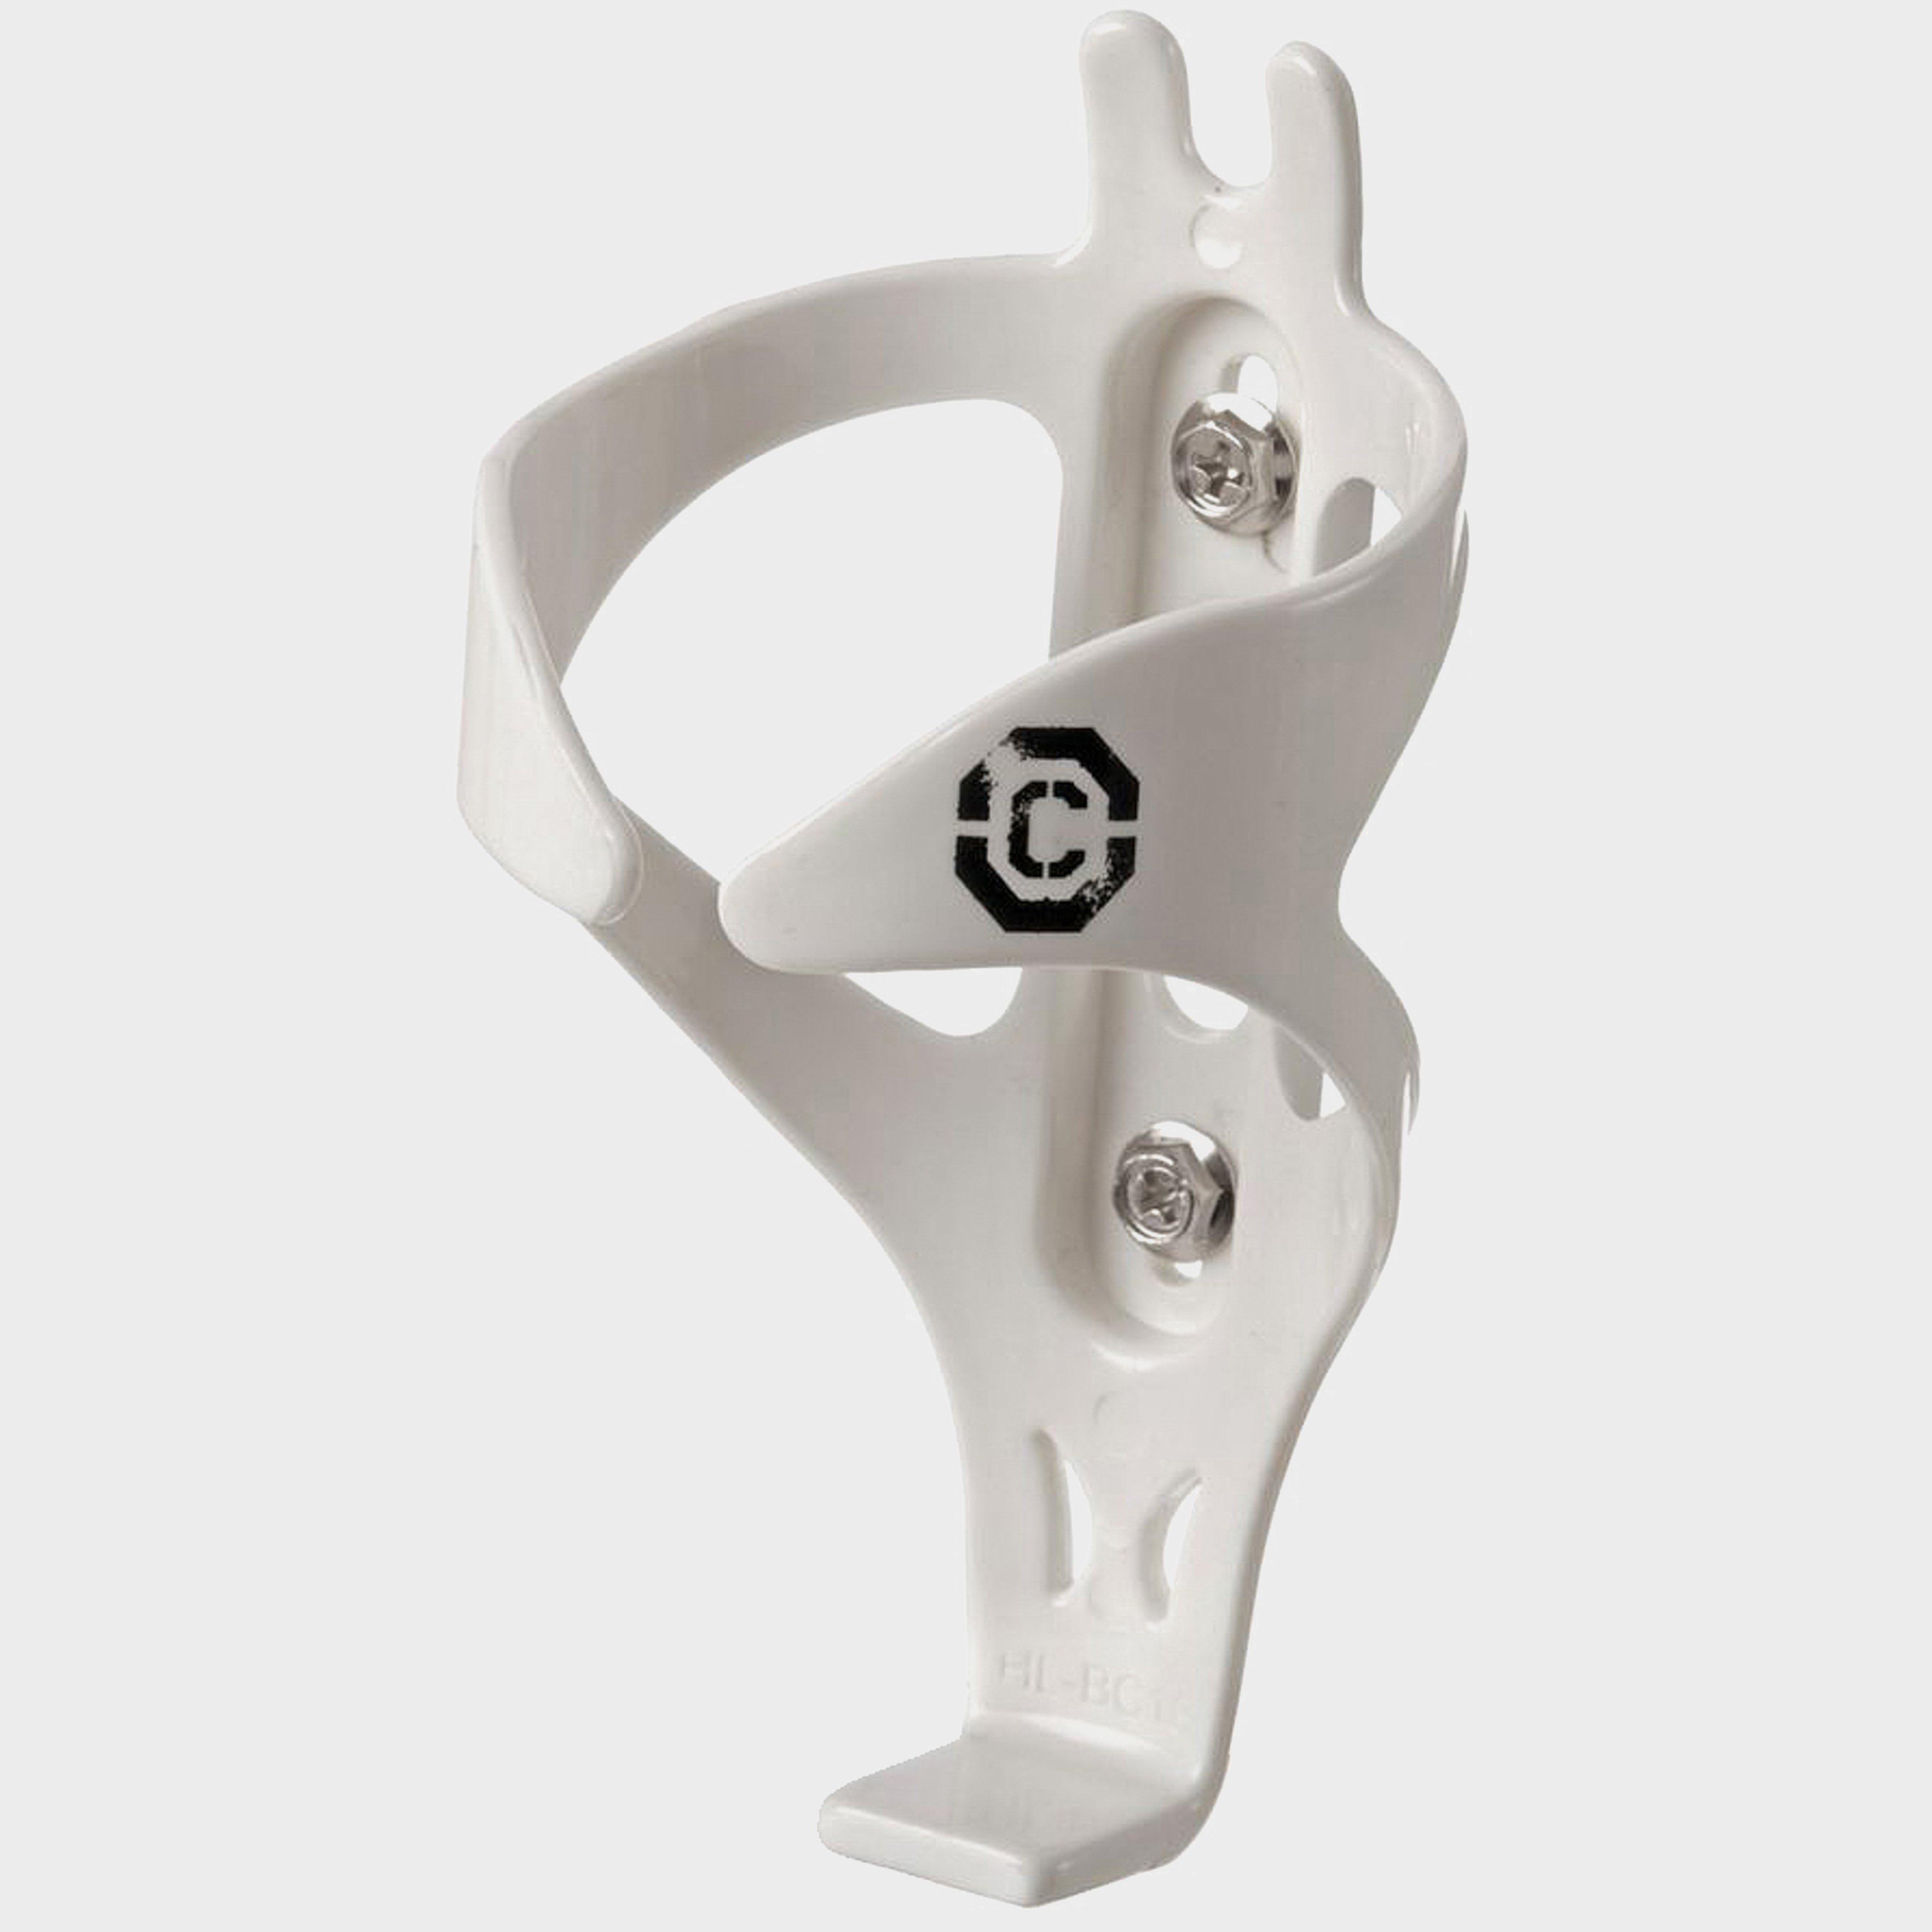 Clarks Polycarbonate Bottle Cage - White/cage  White/cage